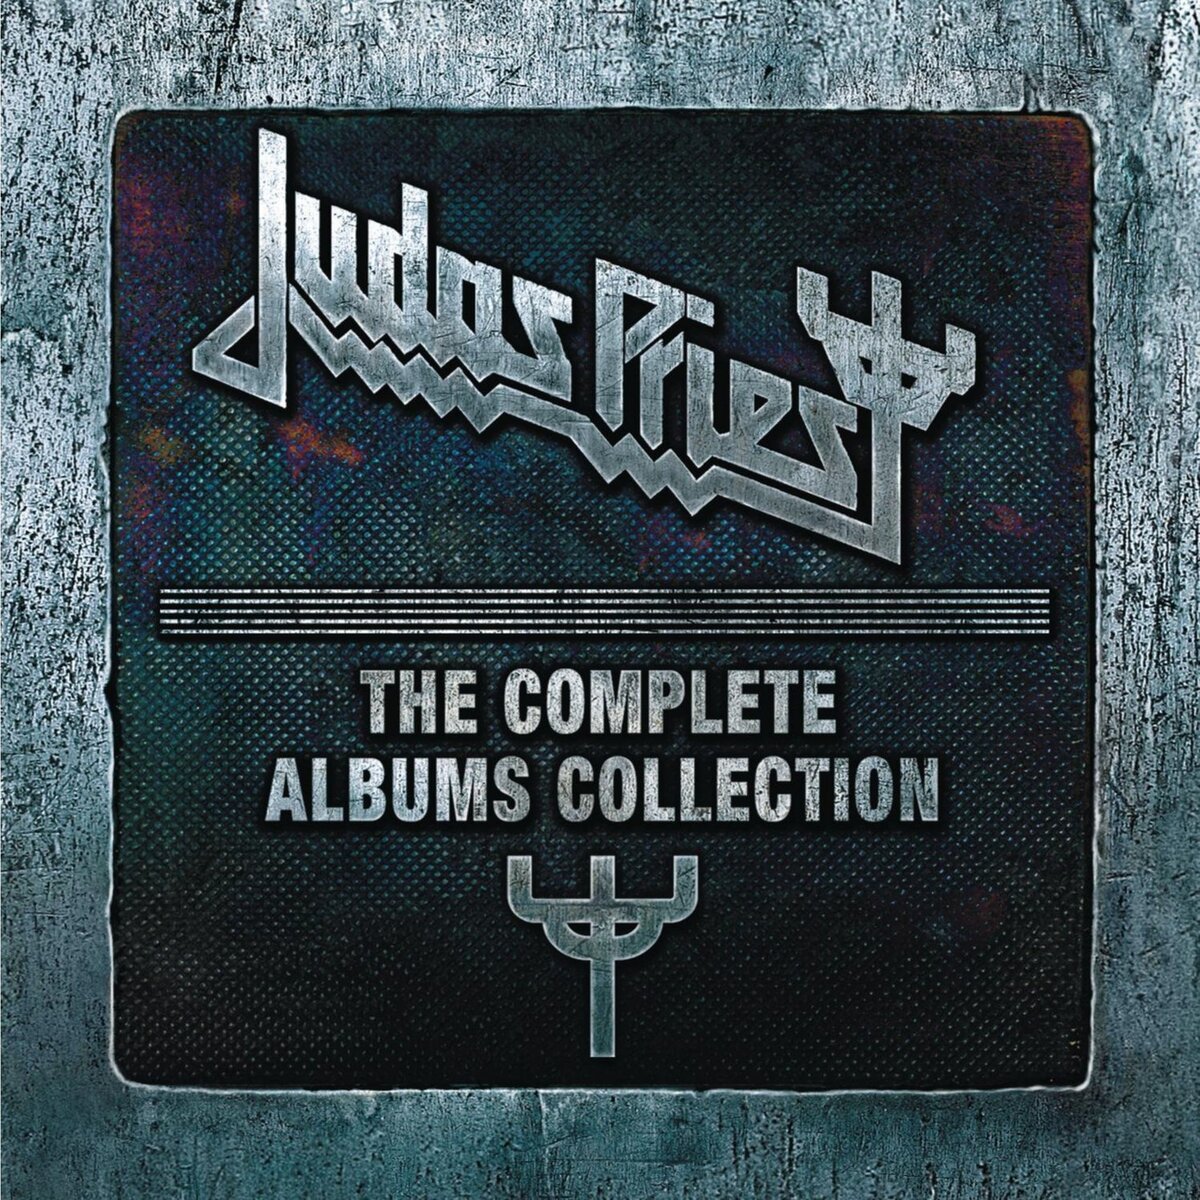 Sony Music JUDAS PRIEST The complete albums collection